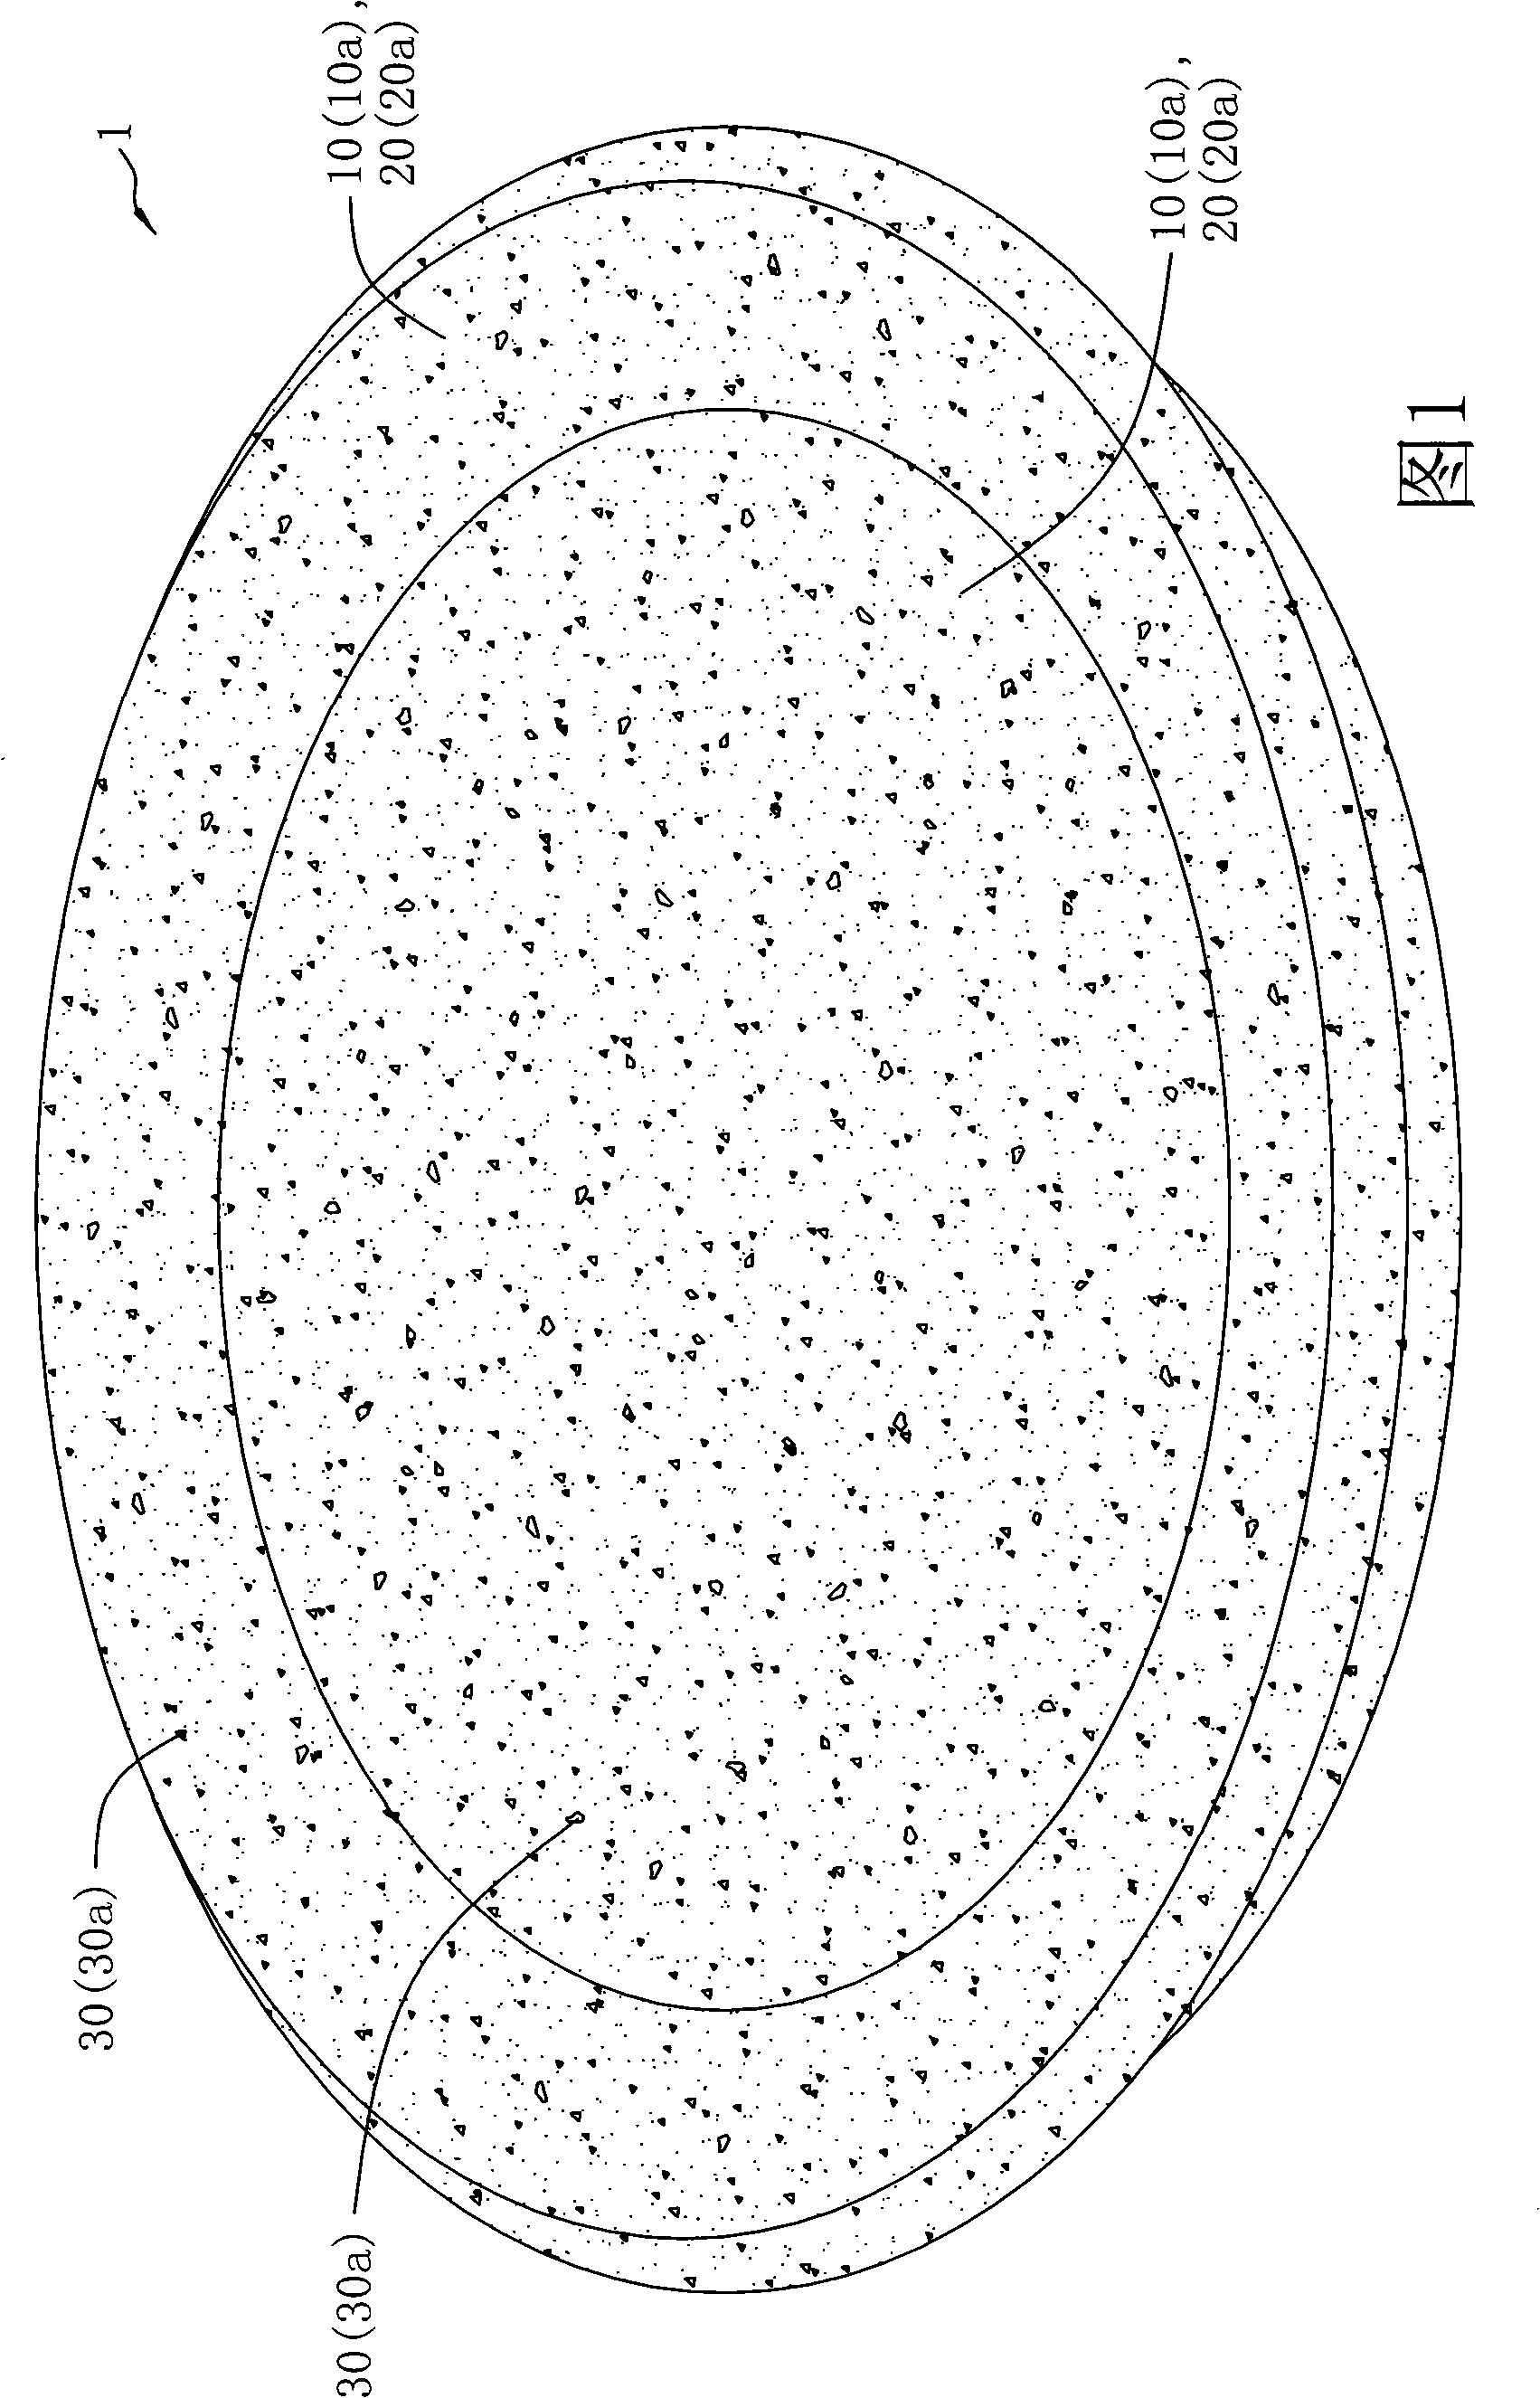 Melamine ware containing wood substance component and its manufacturing method